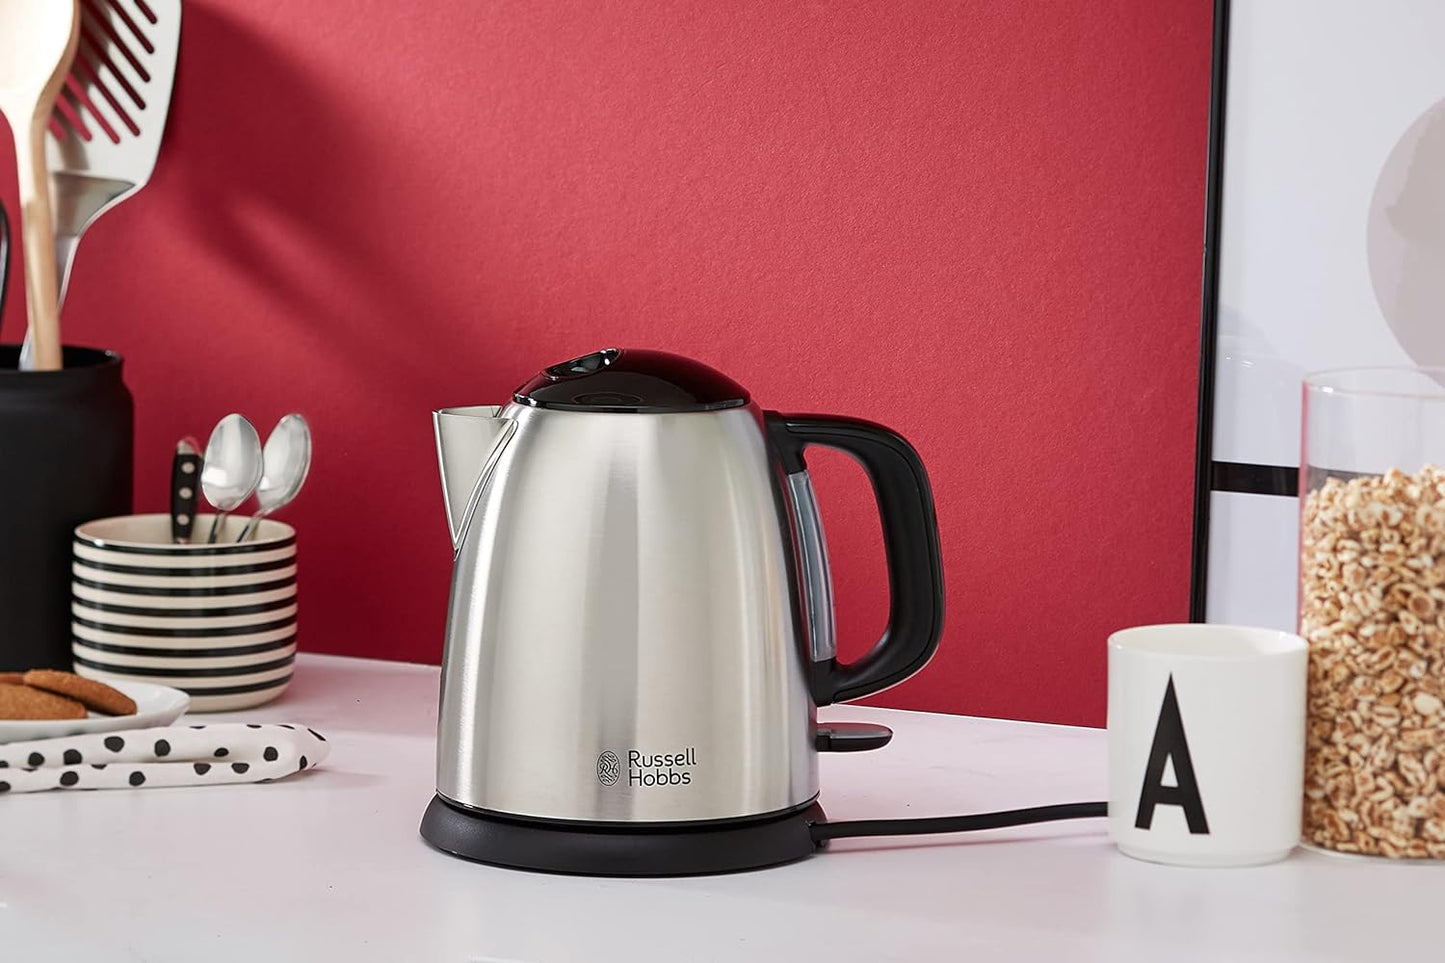 Russell Hobbs Adventure 24991-70 Kettle [1.0 L] Stainless Steel (2400 W, Quick Boil Function, Removable Limescale Filter, External Water Level Indicator, Small Travel Kettle)